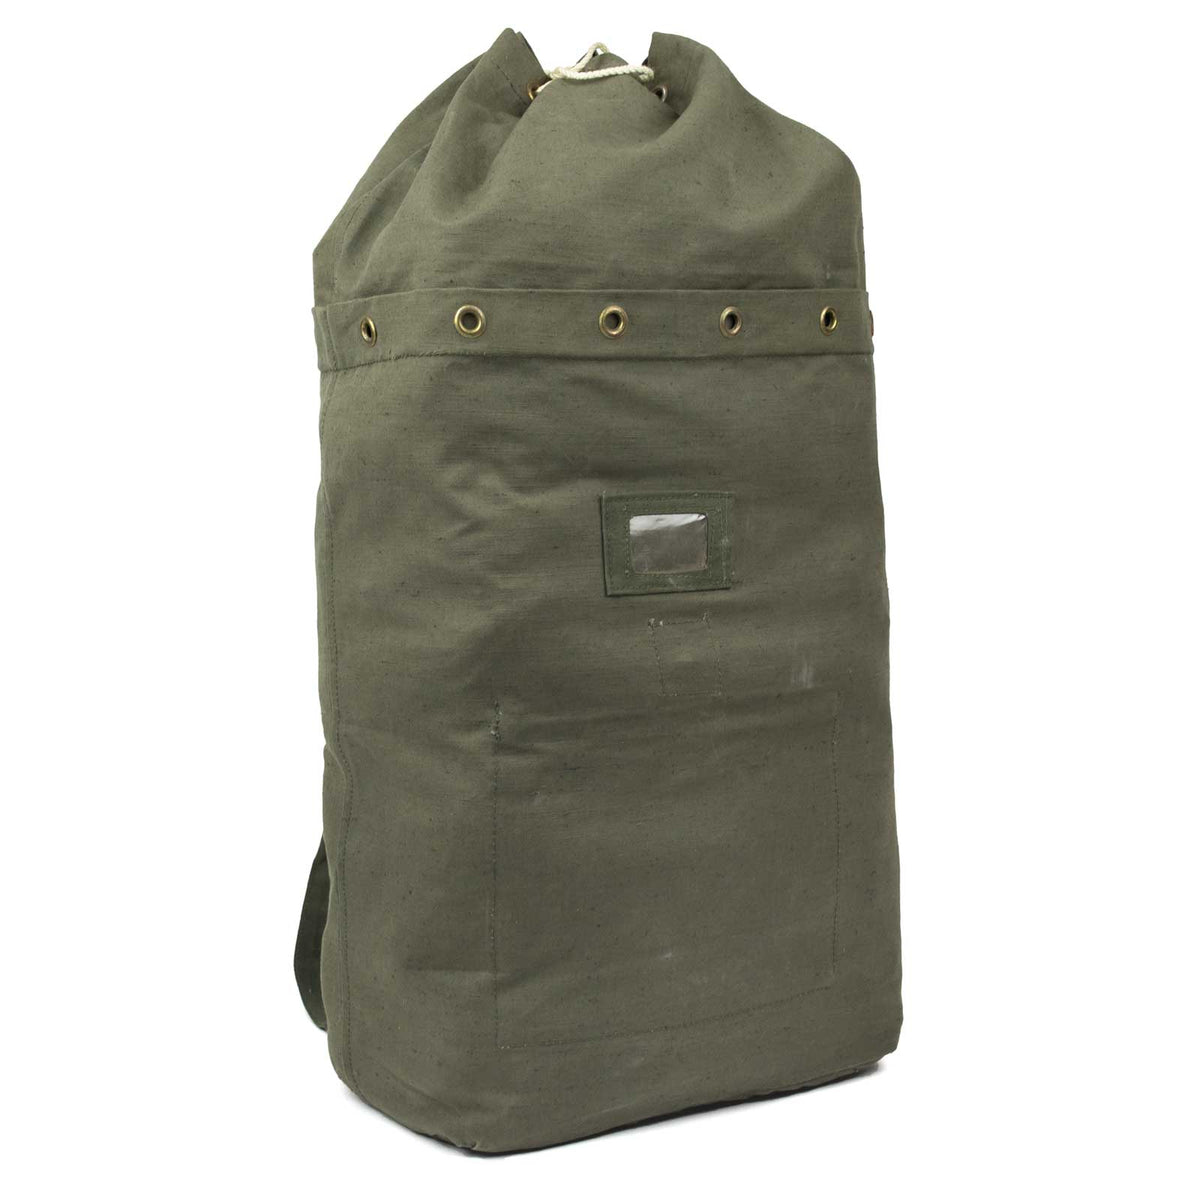 Hungarian Duffle Bag w/Straps front